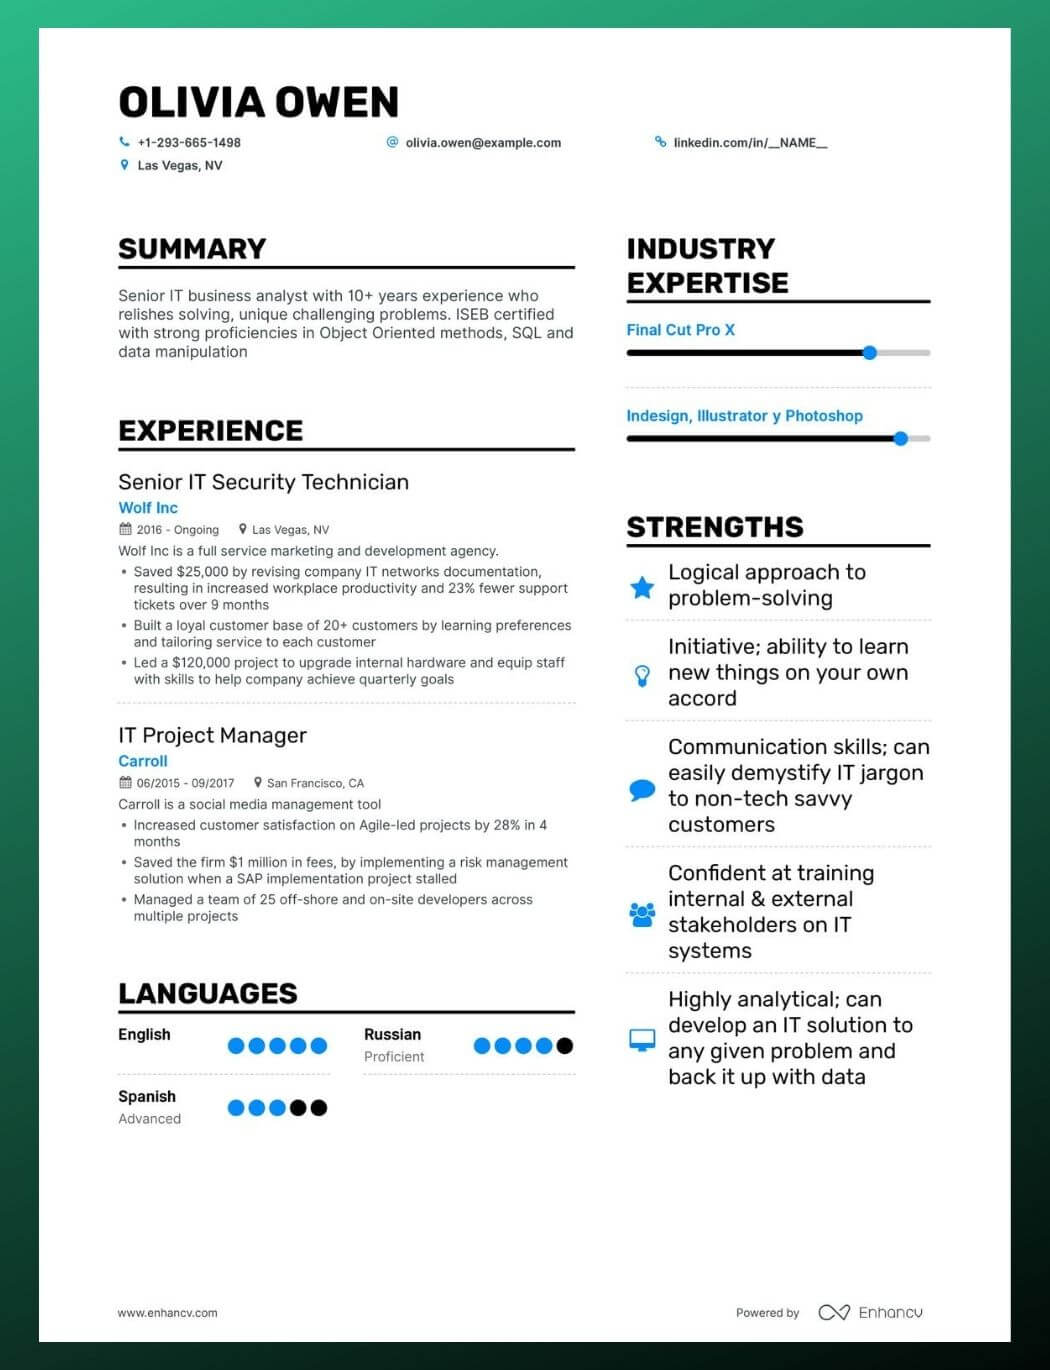 5 Things People Hate About resume